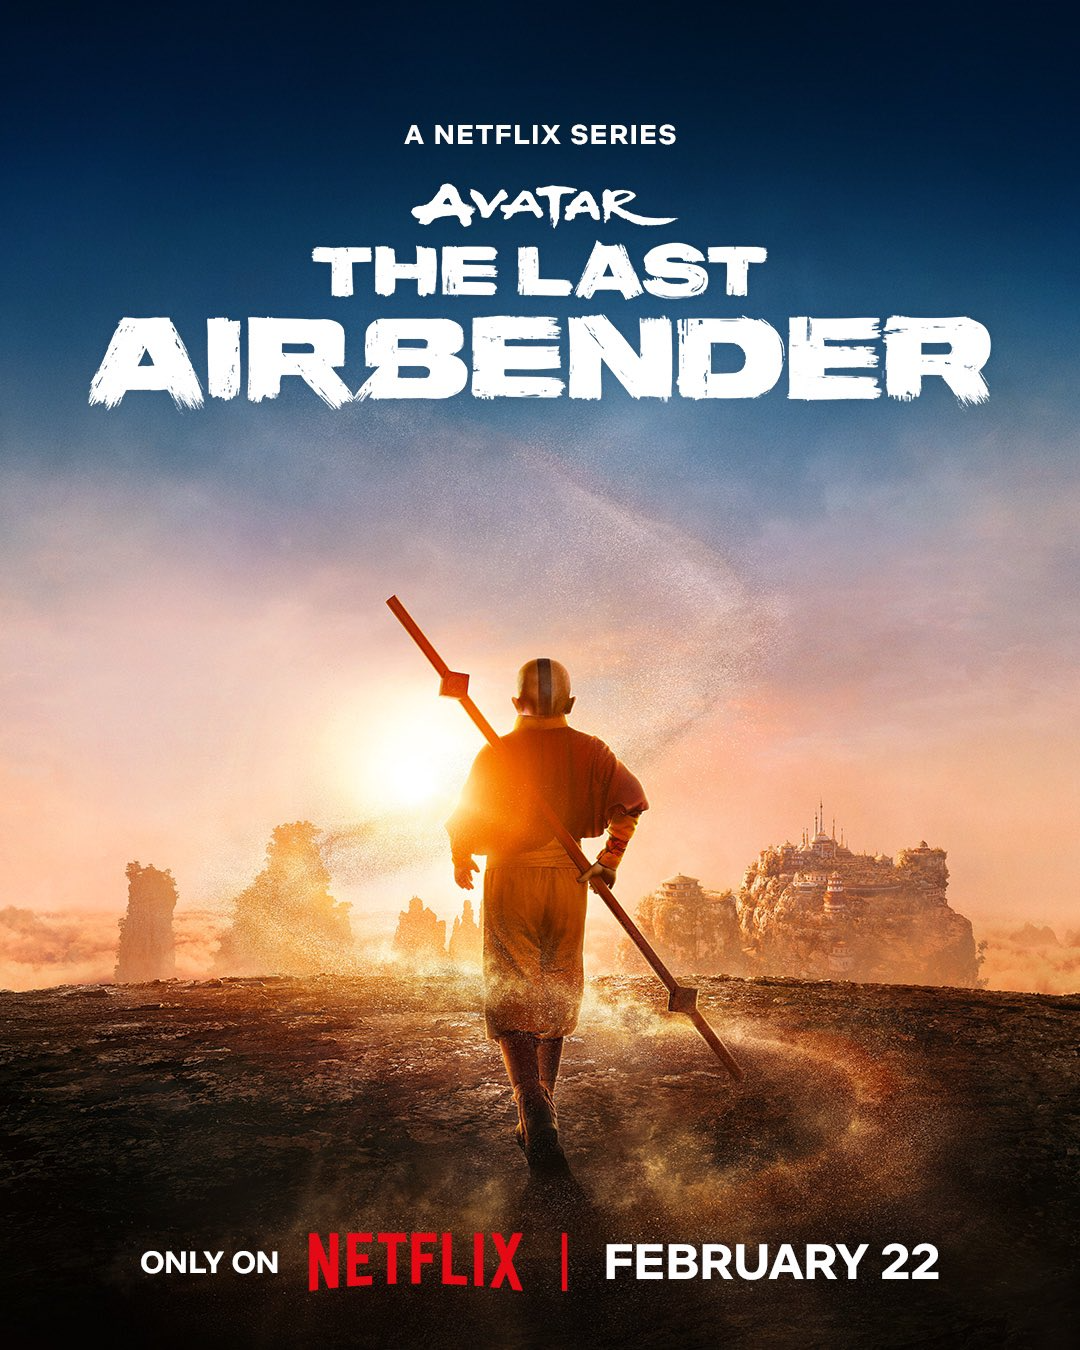 LiveAction Avatar The Last Airbender Poster Previews Netflix Series